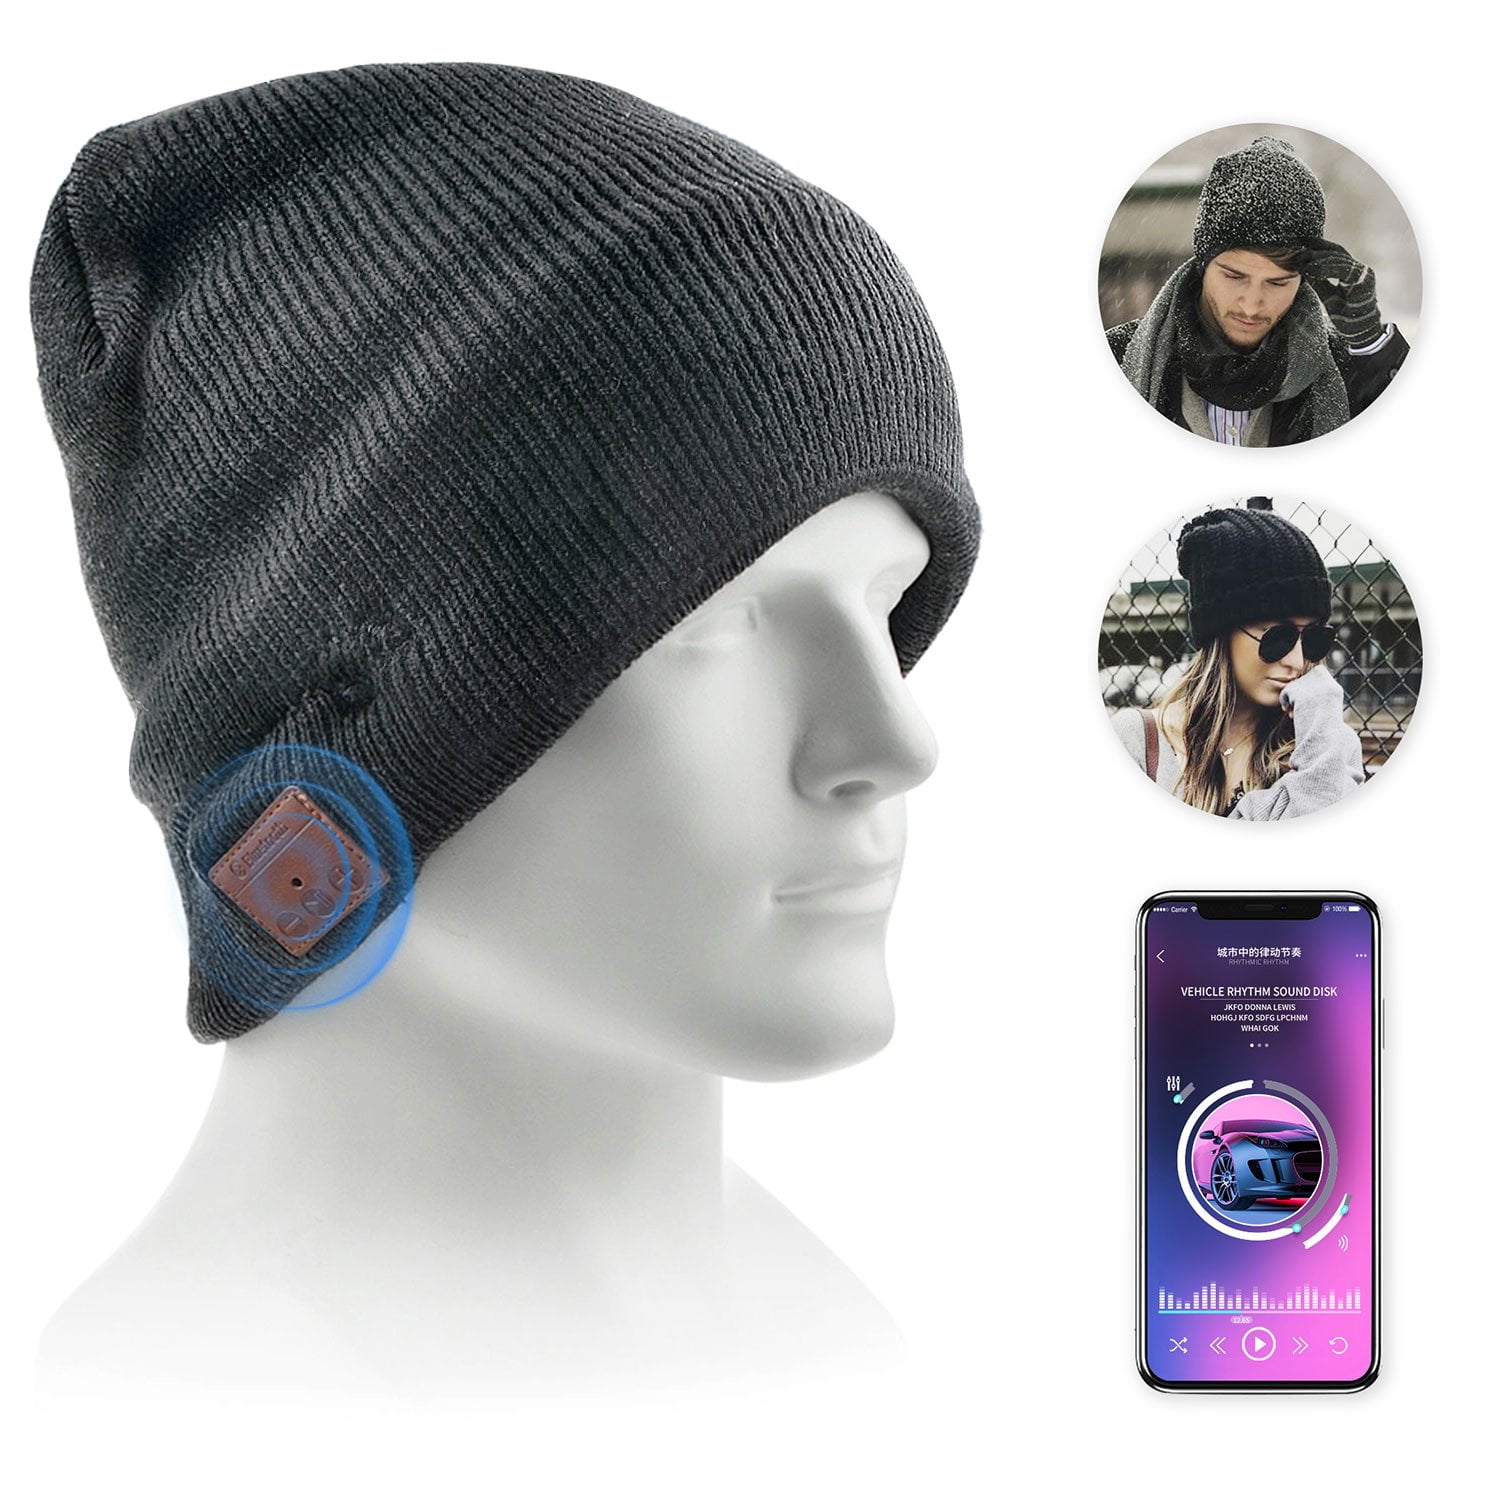 Naiyafly Unisex Bluetooth Beanie Hat with Light,Wireless Headphones, Unique  Christmas Tech Gifts for Men Women Dad